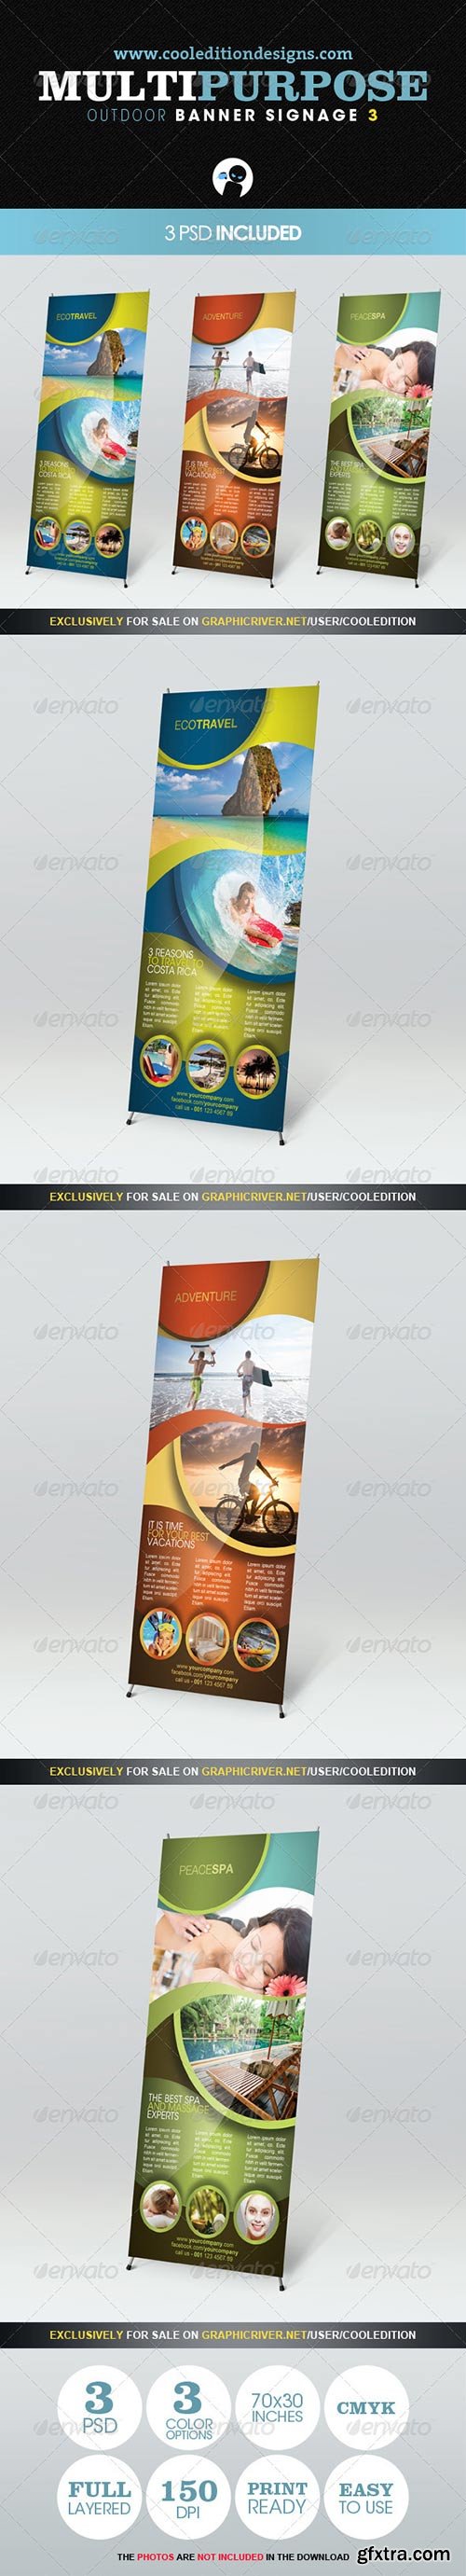 GraphicRiver - Multipurpose Outdoor Banner Signage 3